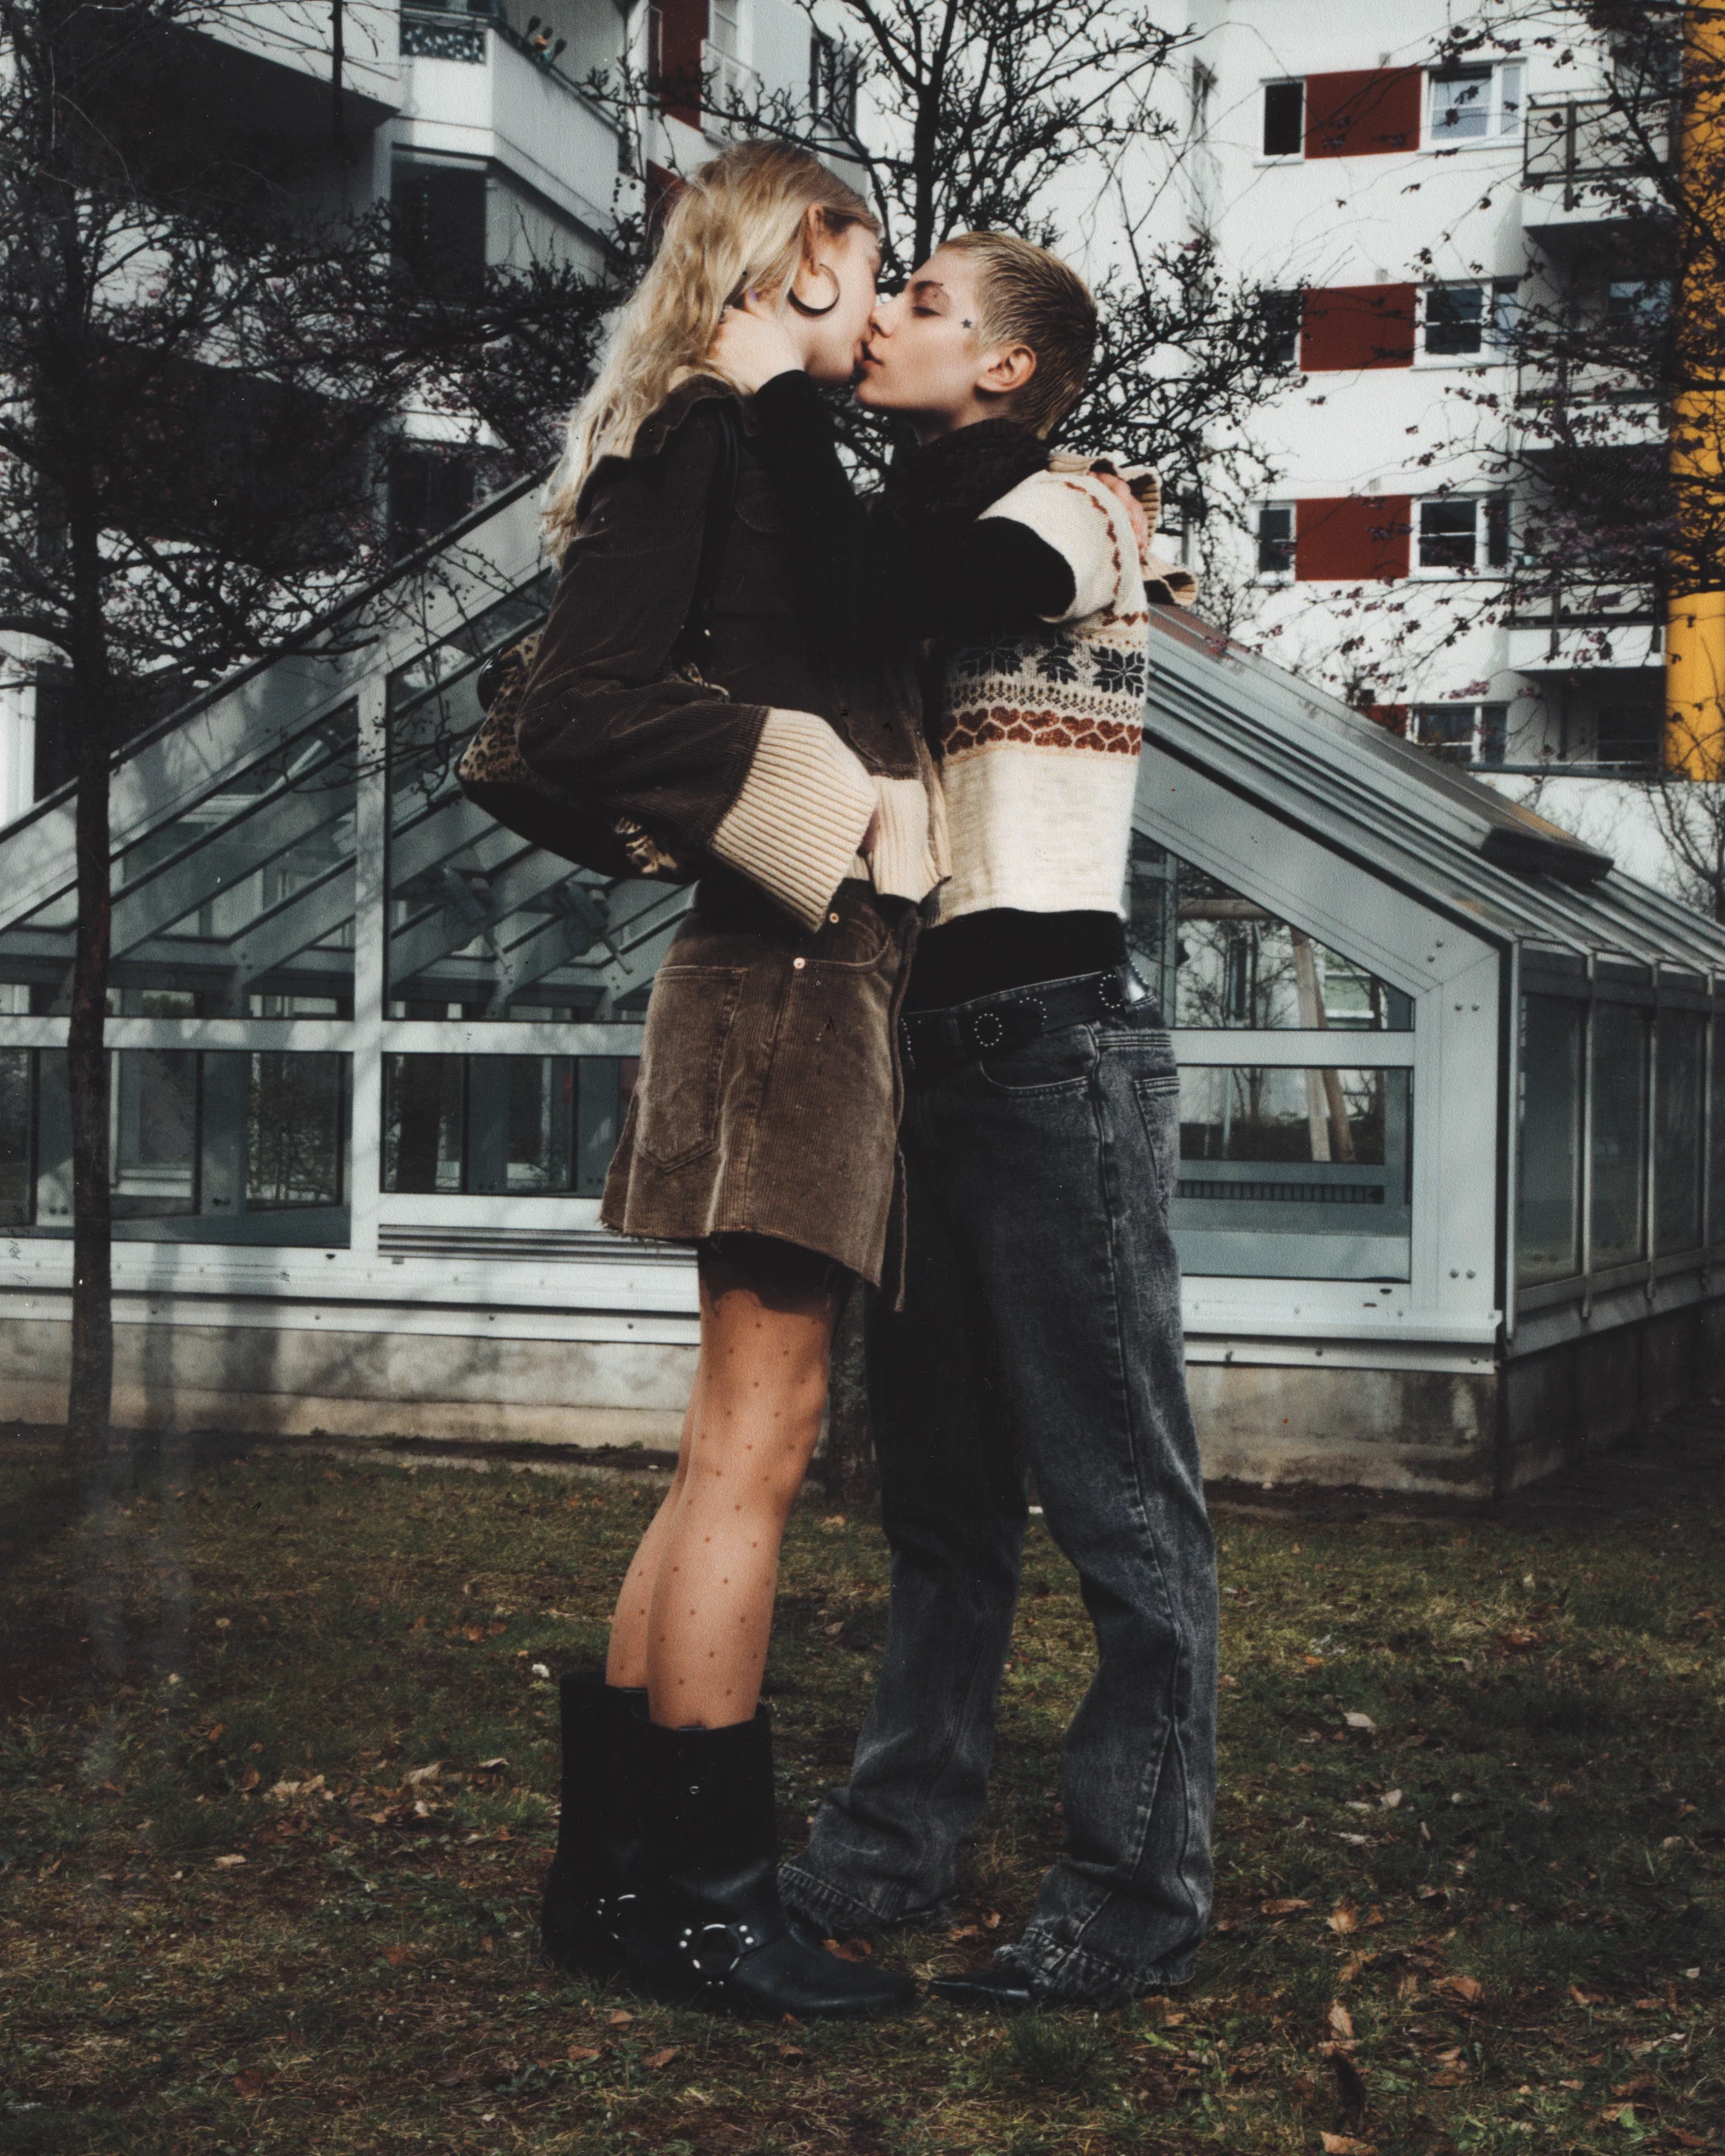 Ebba left jacket and skirt Our Legacy, tights Wolford, bag and earrings stylists own, boots Zadig&Voltaire, Sara right knitted T-Shirt Our Legacy, longsleeve Wolford, jeans Martine Web, scarf and belt stylists own, shoes Richert Beil, photographer Jan Philipzen, stylist Ina Witzel